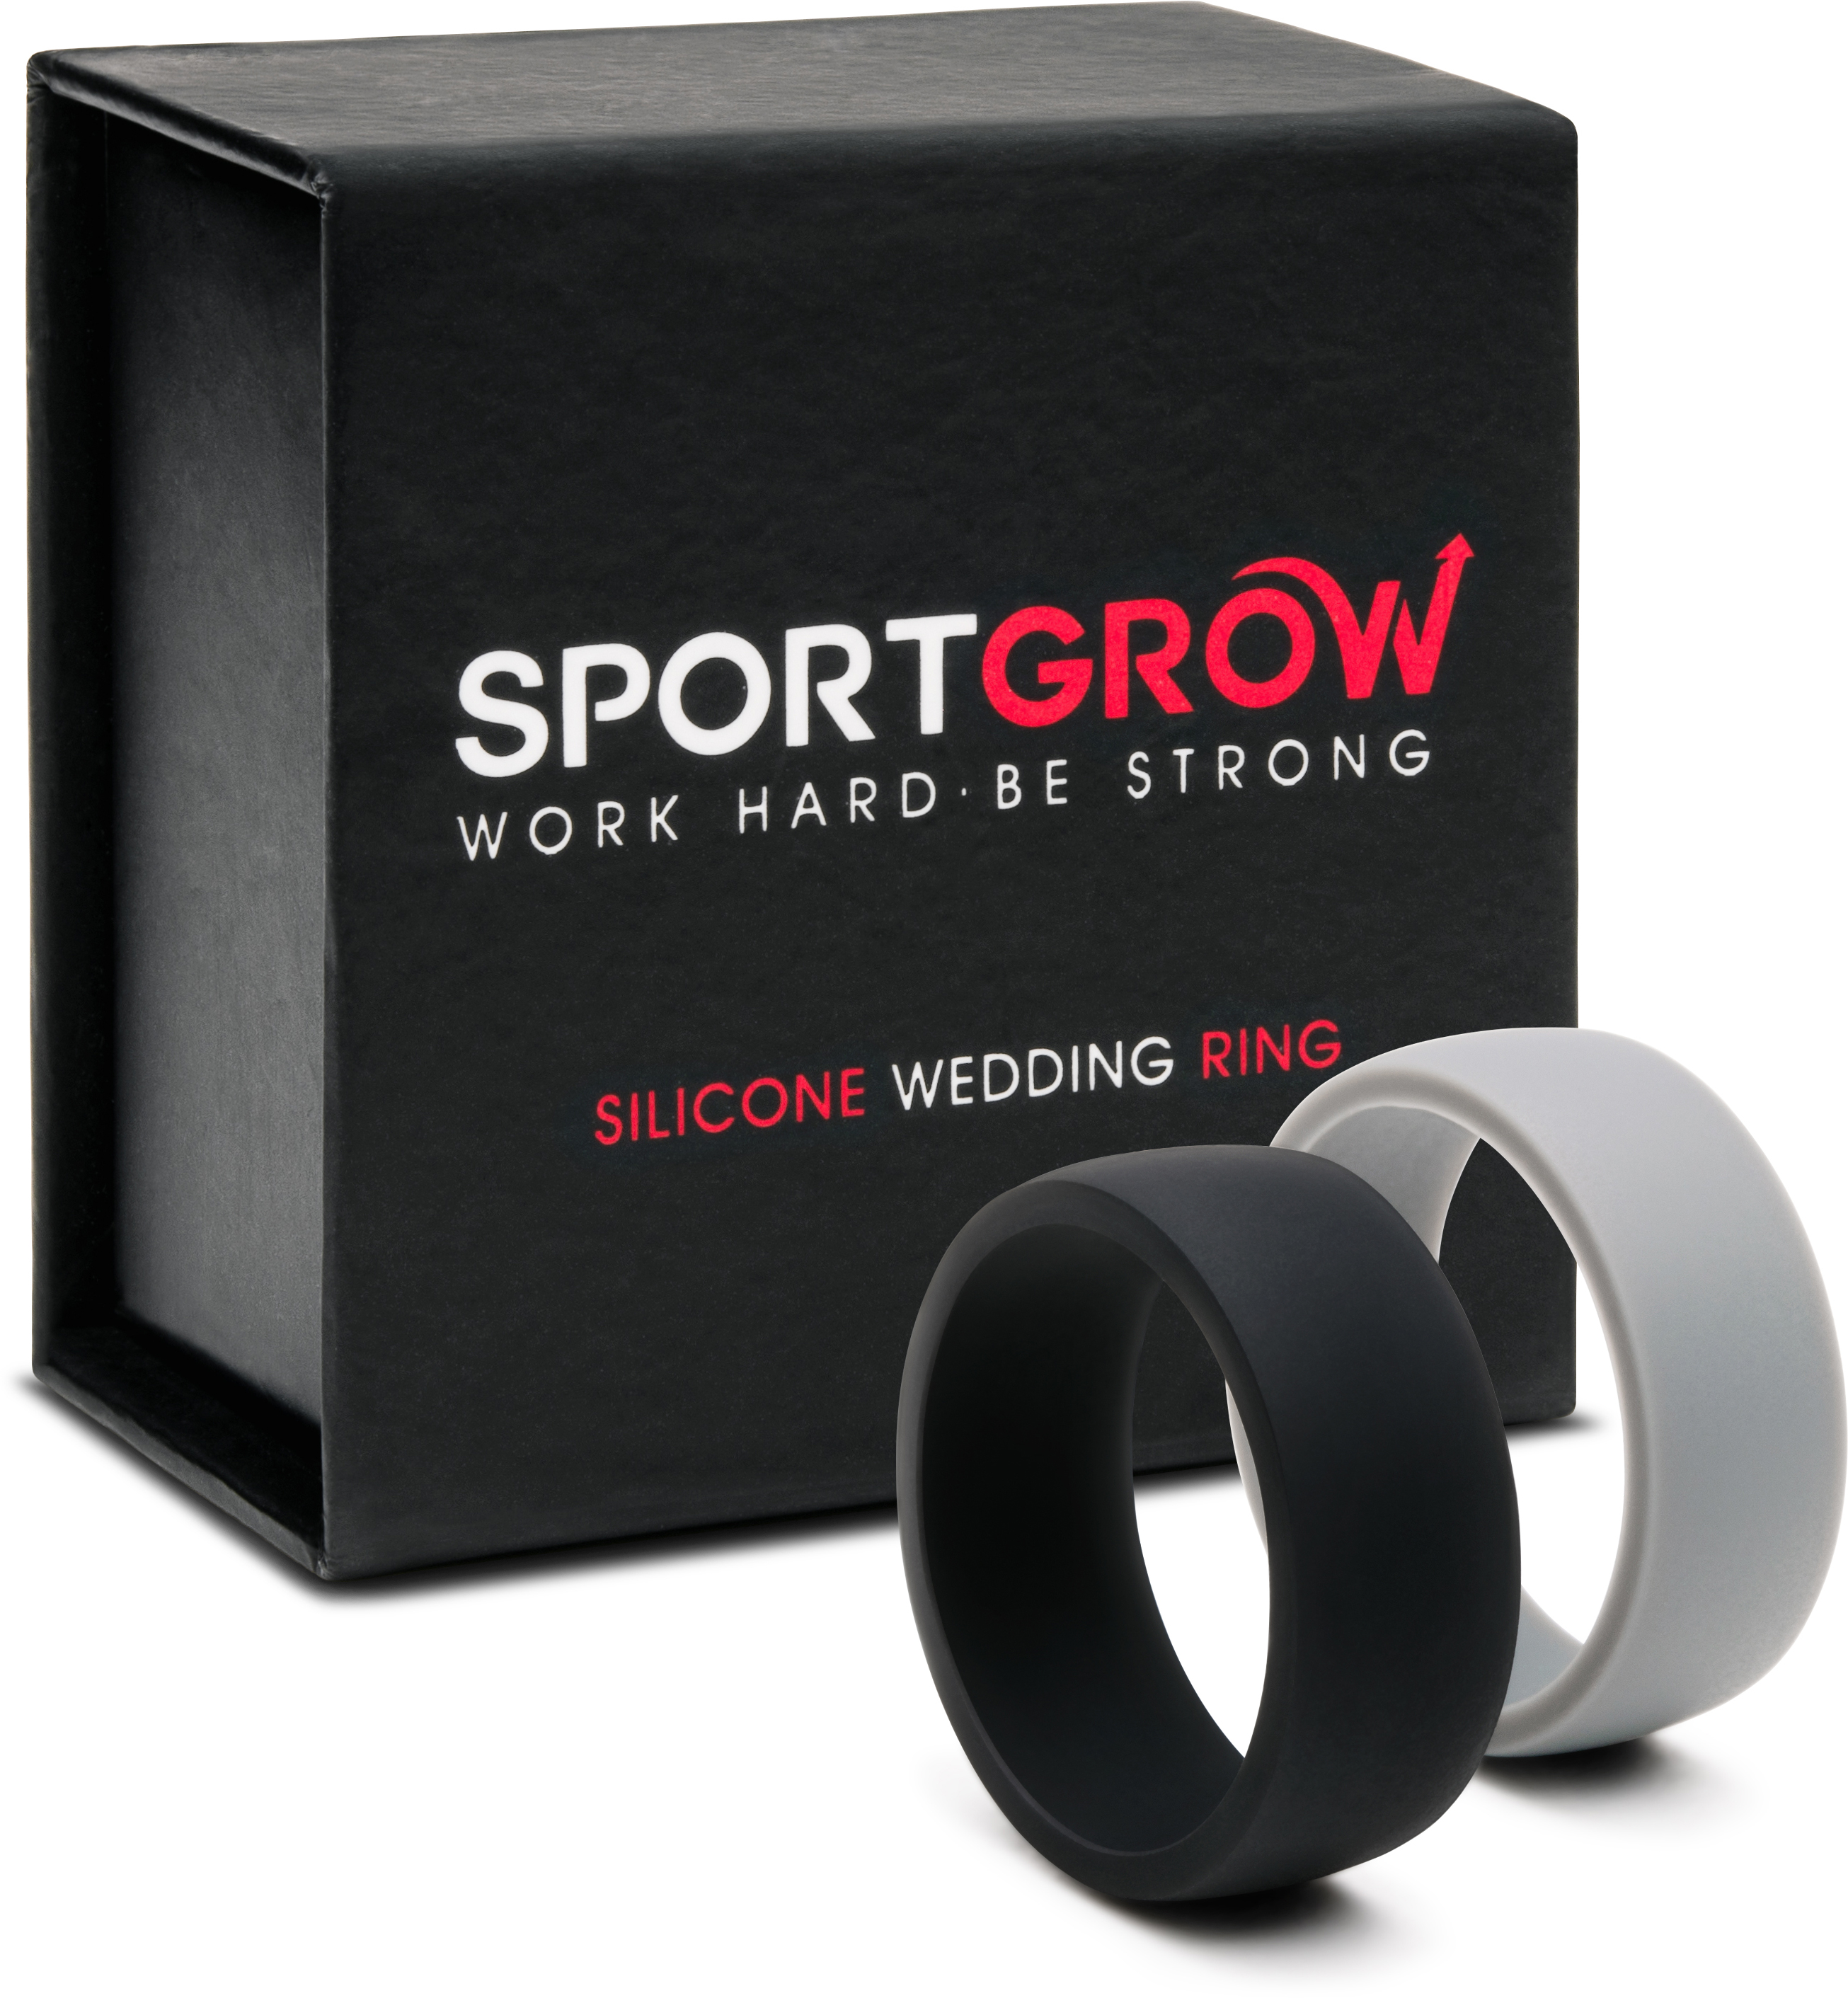 Silicone Wedding Ring, Silicone Wedding Band For Men, 2 Rings Pack Black+Grey